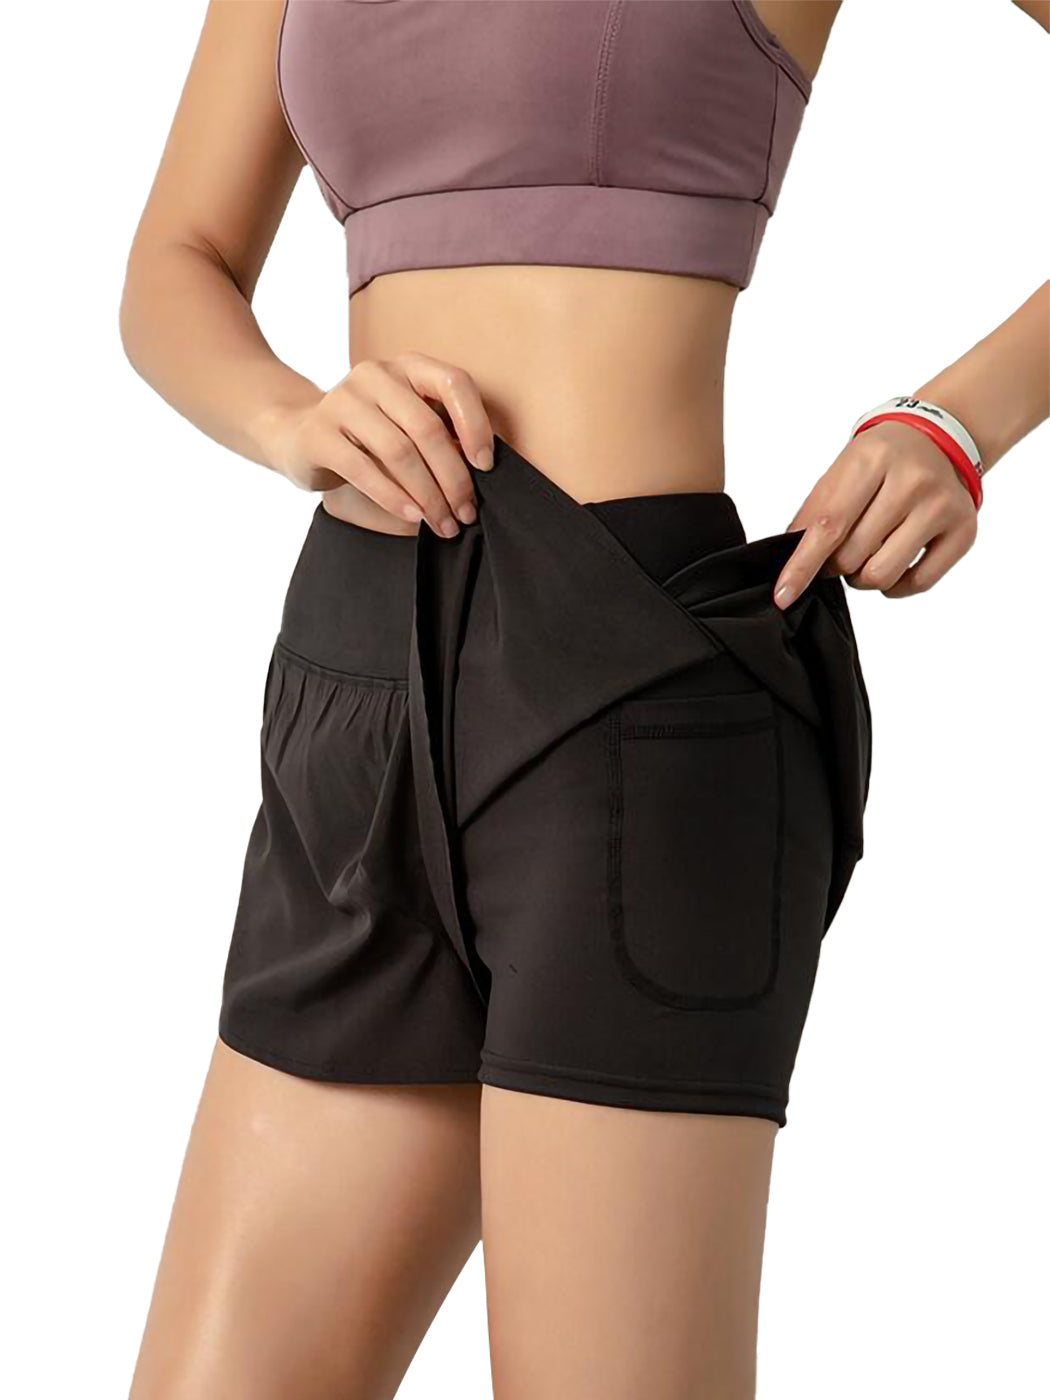 Workout Running Shorts Quick Dry with Pocket